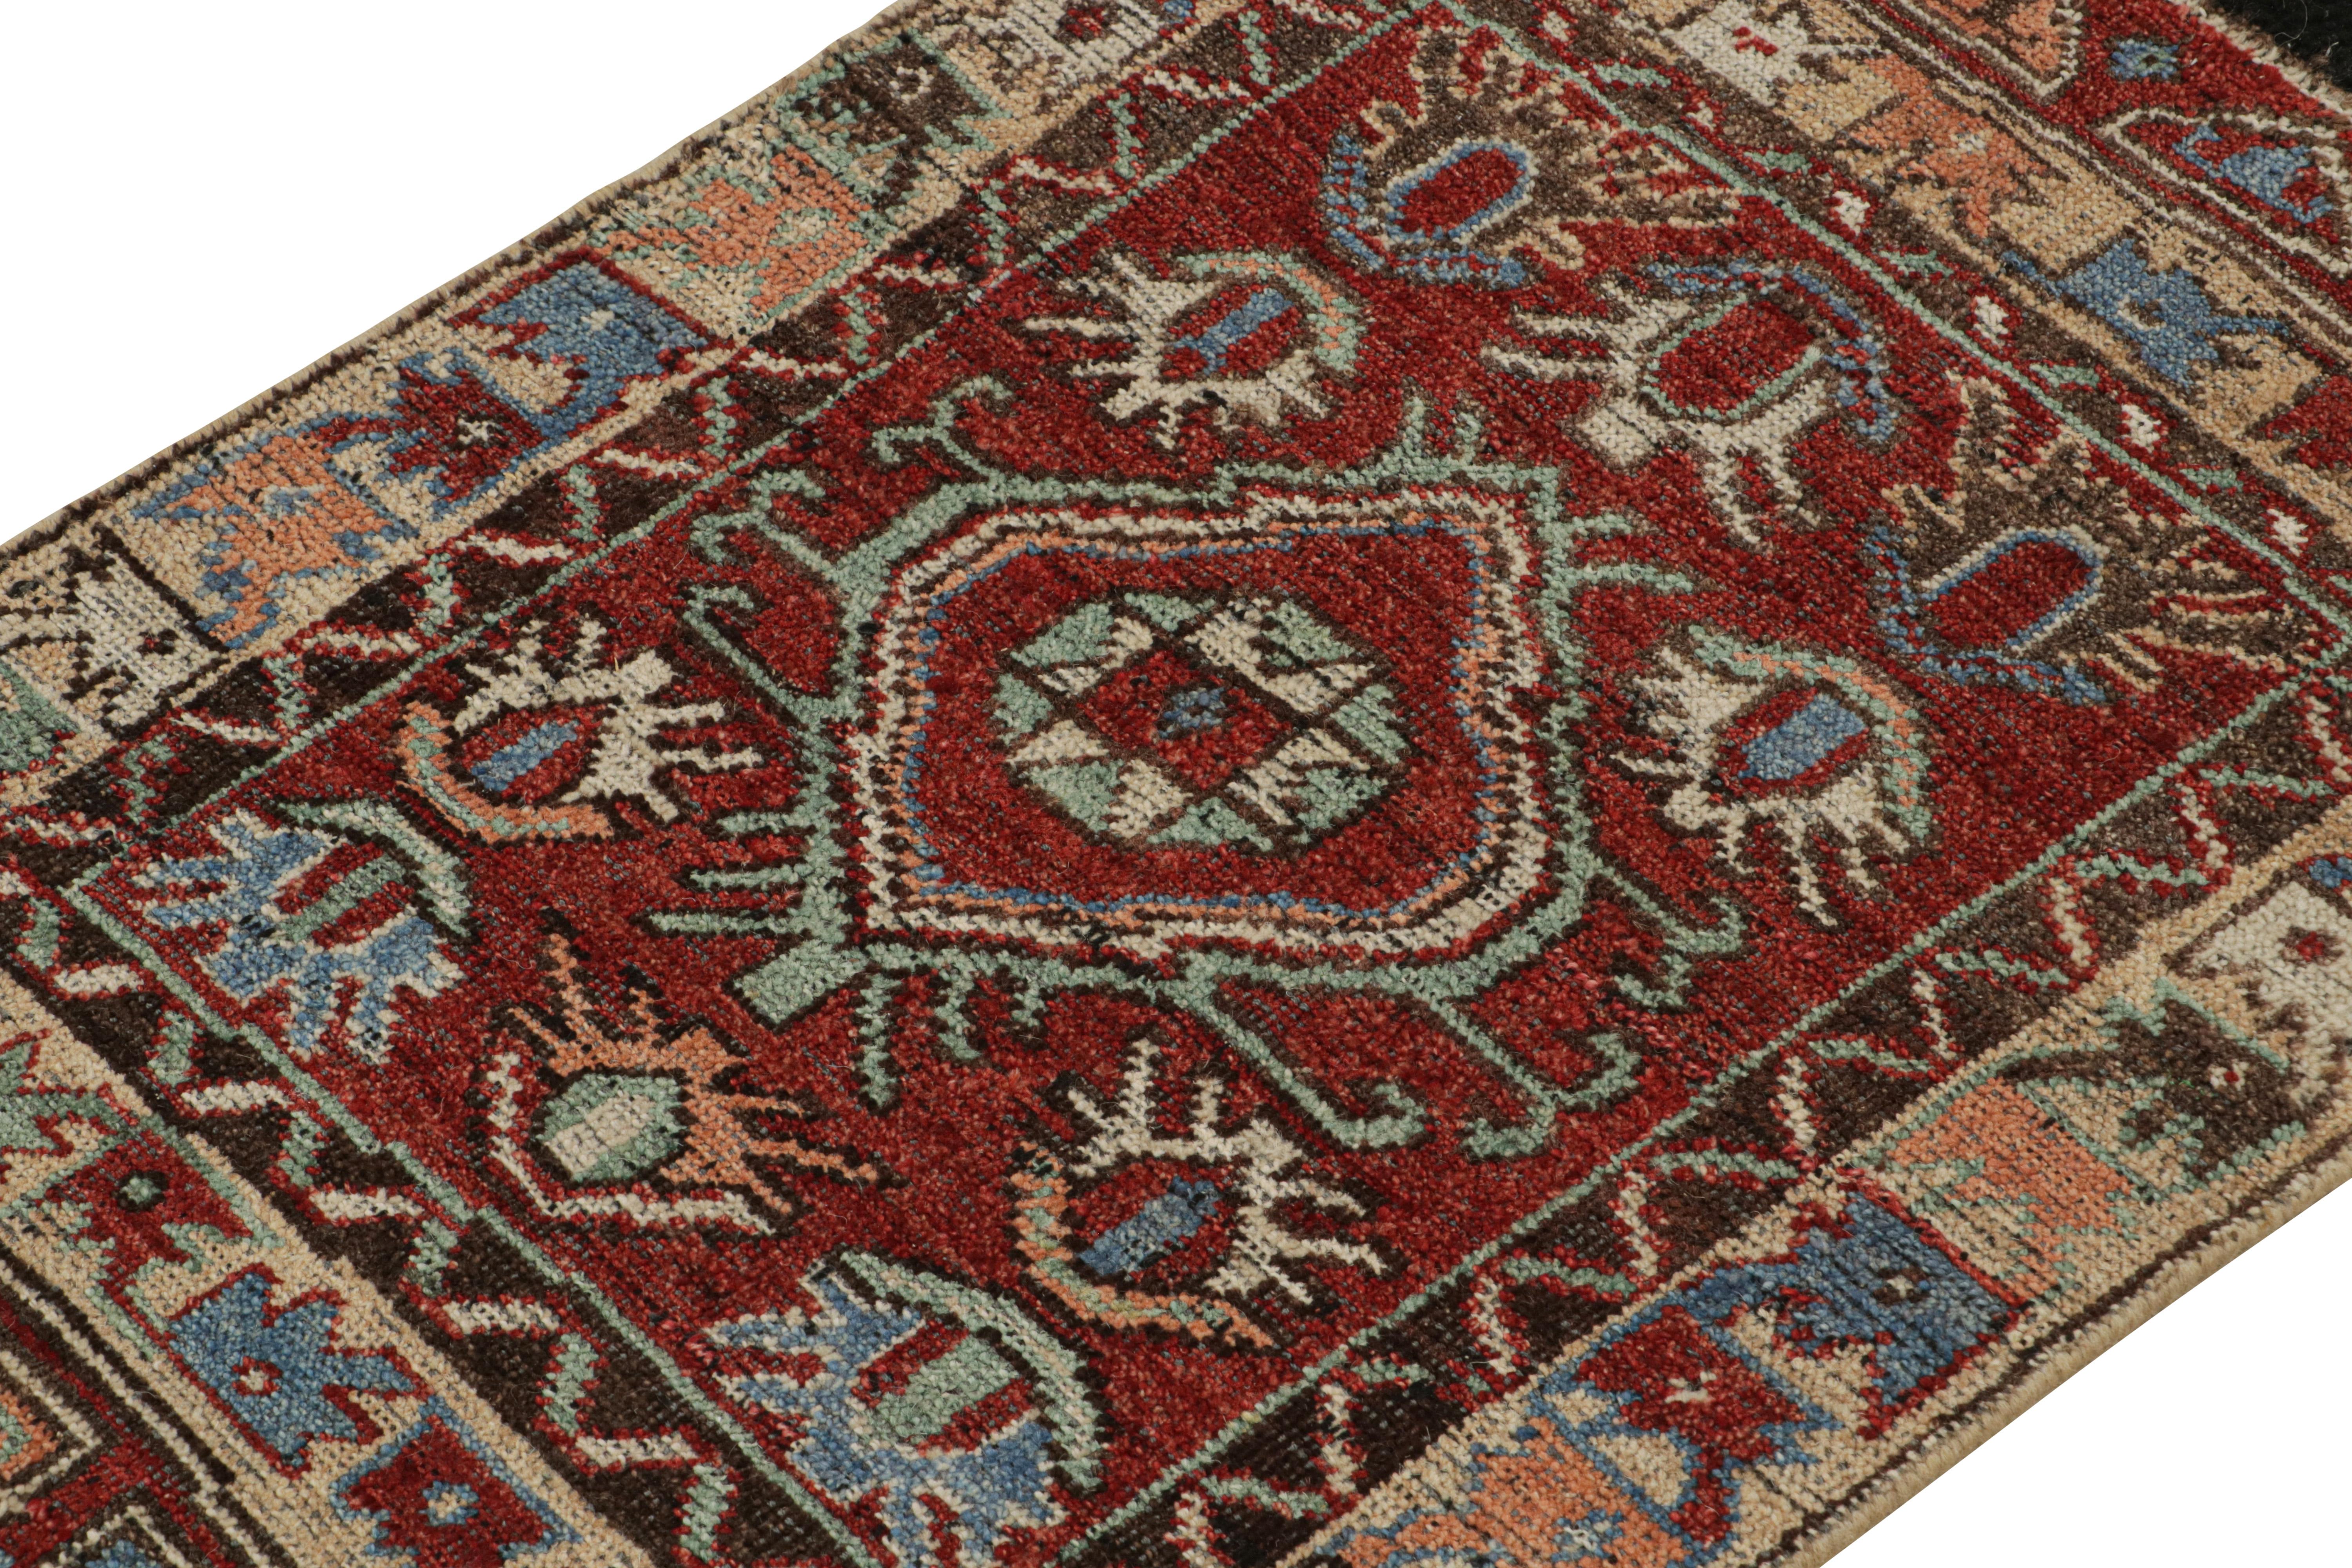 Hand-Knotted Rug & Kilim’s Antique Tribal Style rug in Red with Geometric Patterns For Sale